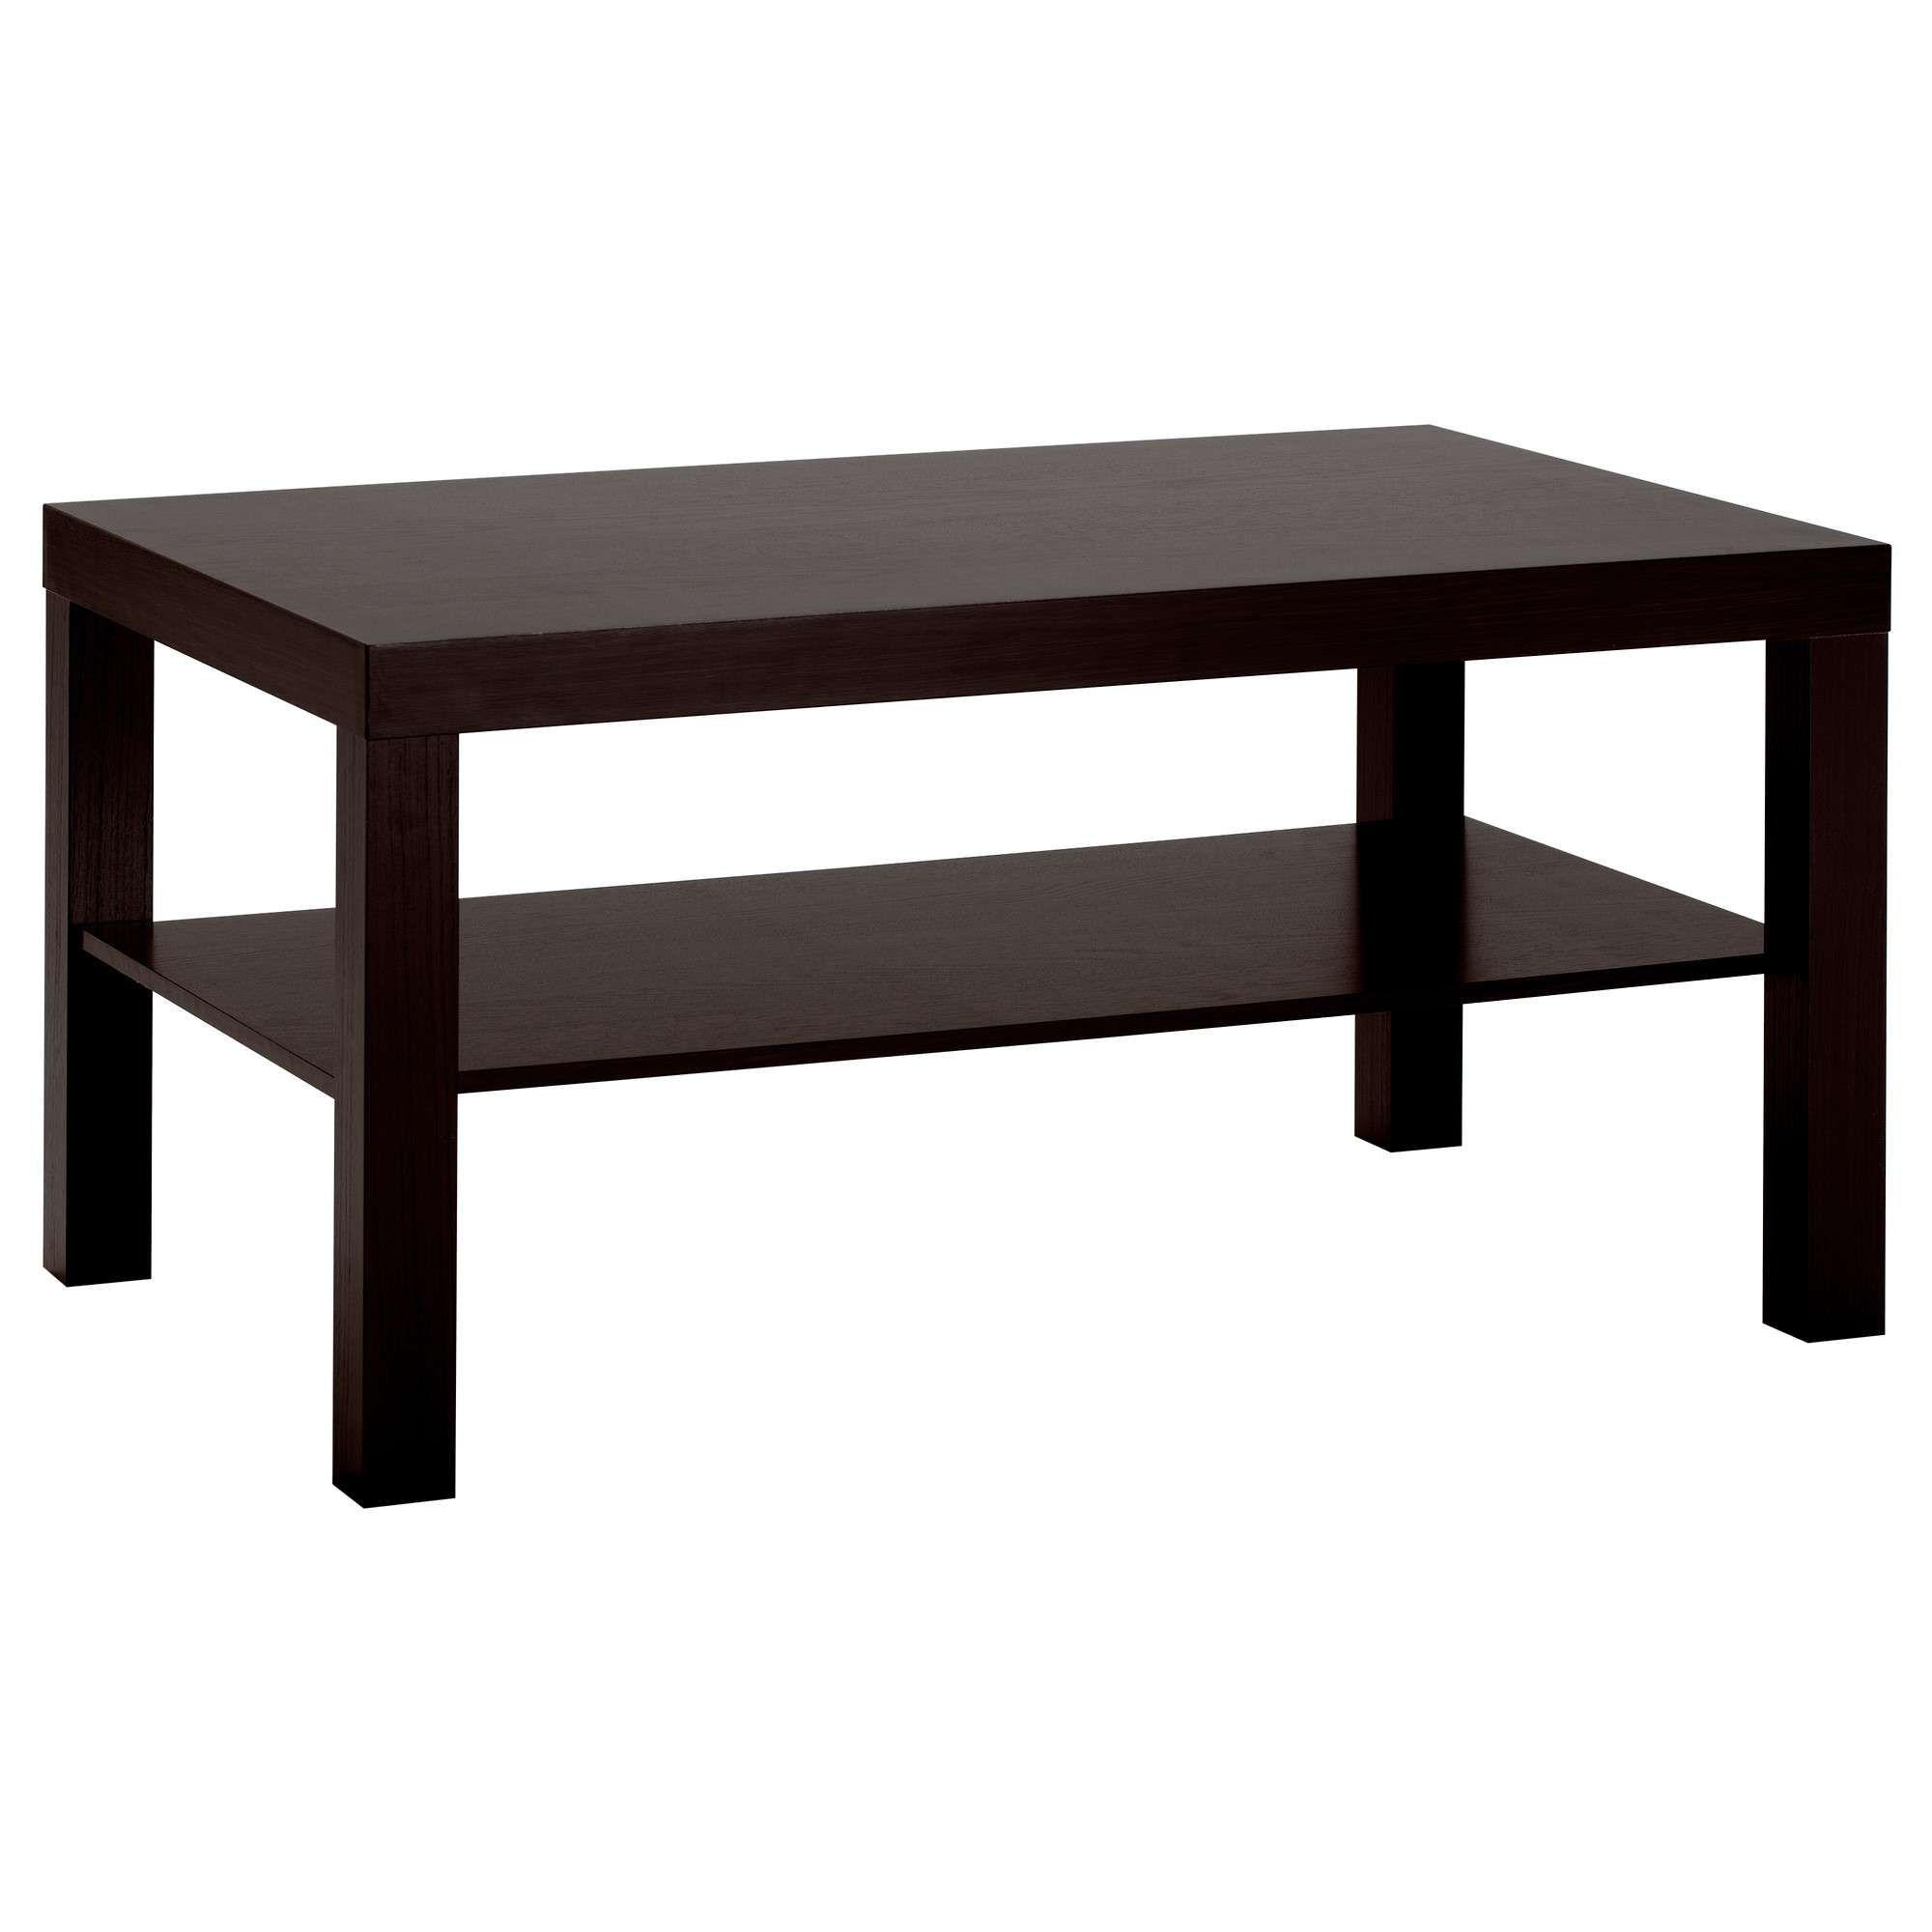 Lack Coffee Table – Black Brown, 35 3/8x21 5/8 " – Ikea Intended For Most Current Dark Coffee Tables (View 16 of 20)